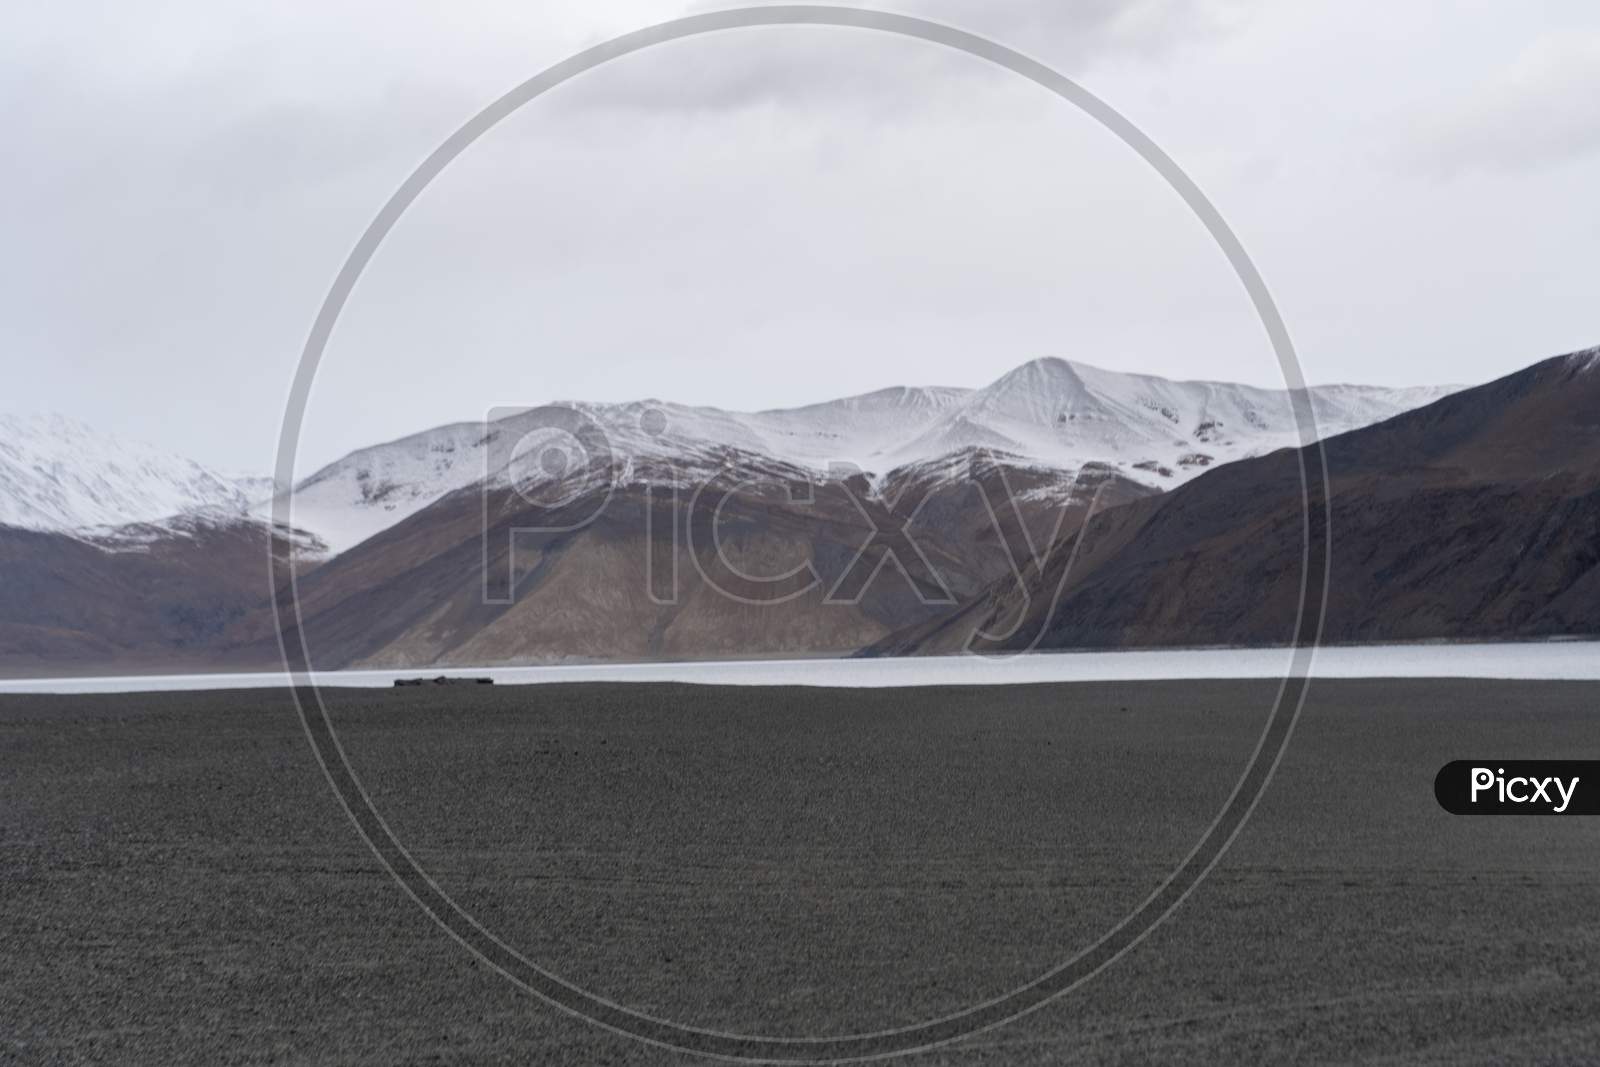 Pangong Tso, Tibetan For "High Grassland Lake", Also Referred To As Pangong Lake, Is An Endorheic Lake In The Himalayas Situated At A Height Of About 4,350 M. At Leh Ladakh, Jammu And Kashmir, India.